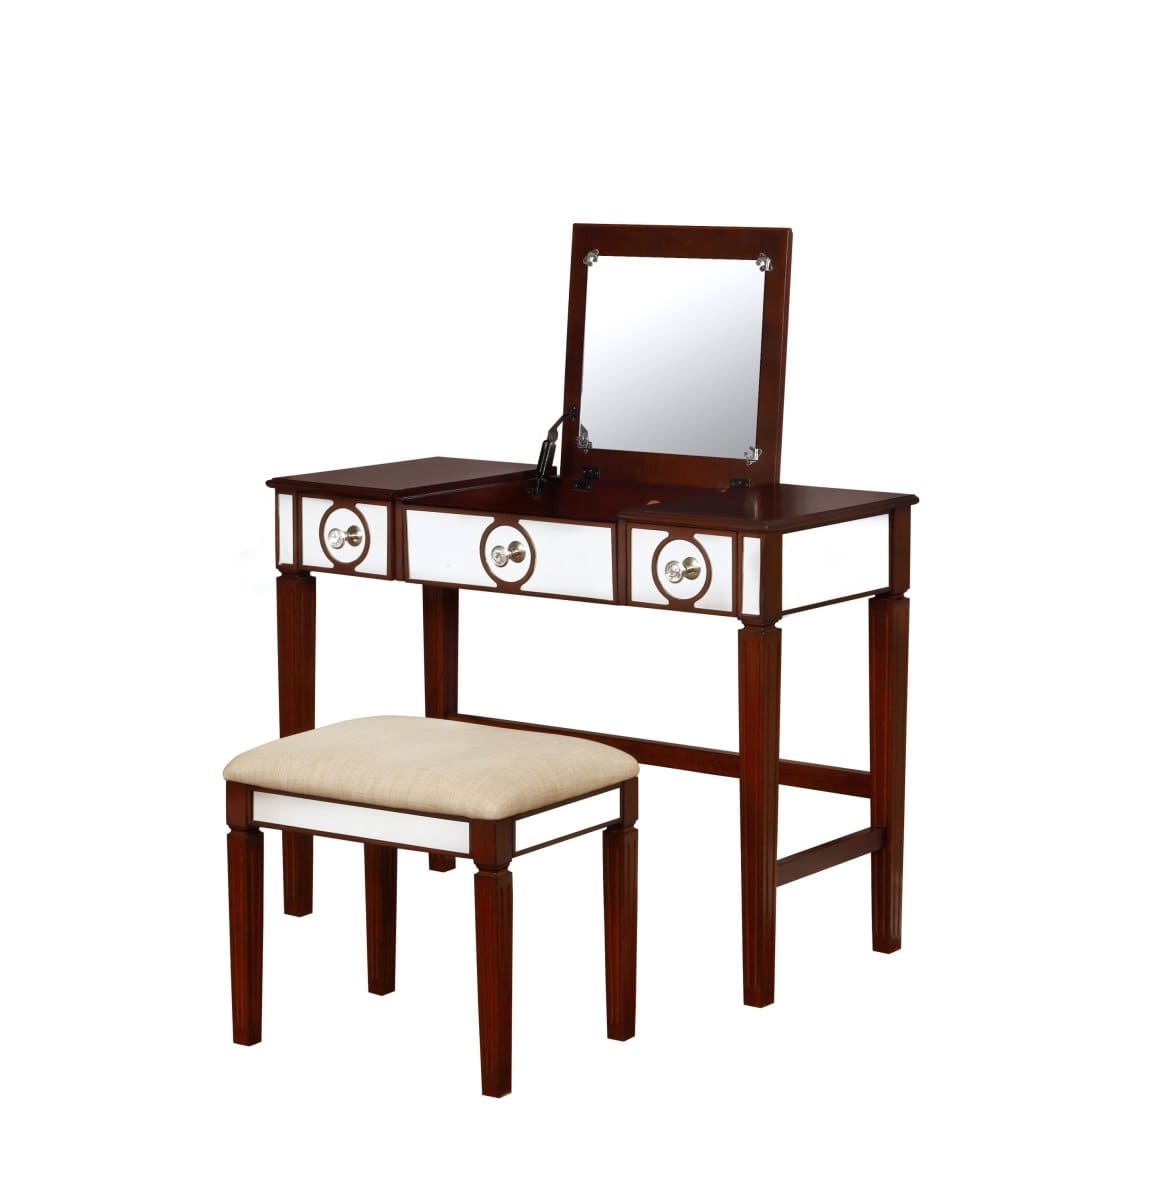 Acme Makeup Vanity Cherry Wood with Mirrored Stool Makeup Vanity Cherry Wood with Mirrors Mattress-Xperts-Florida